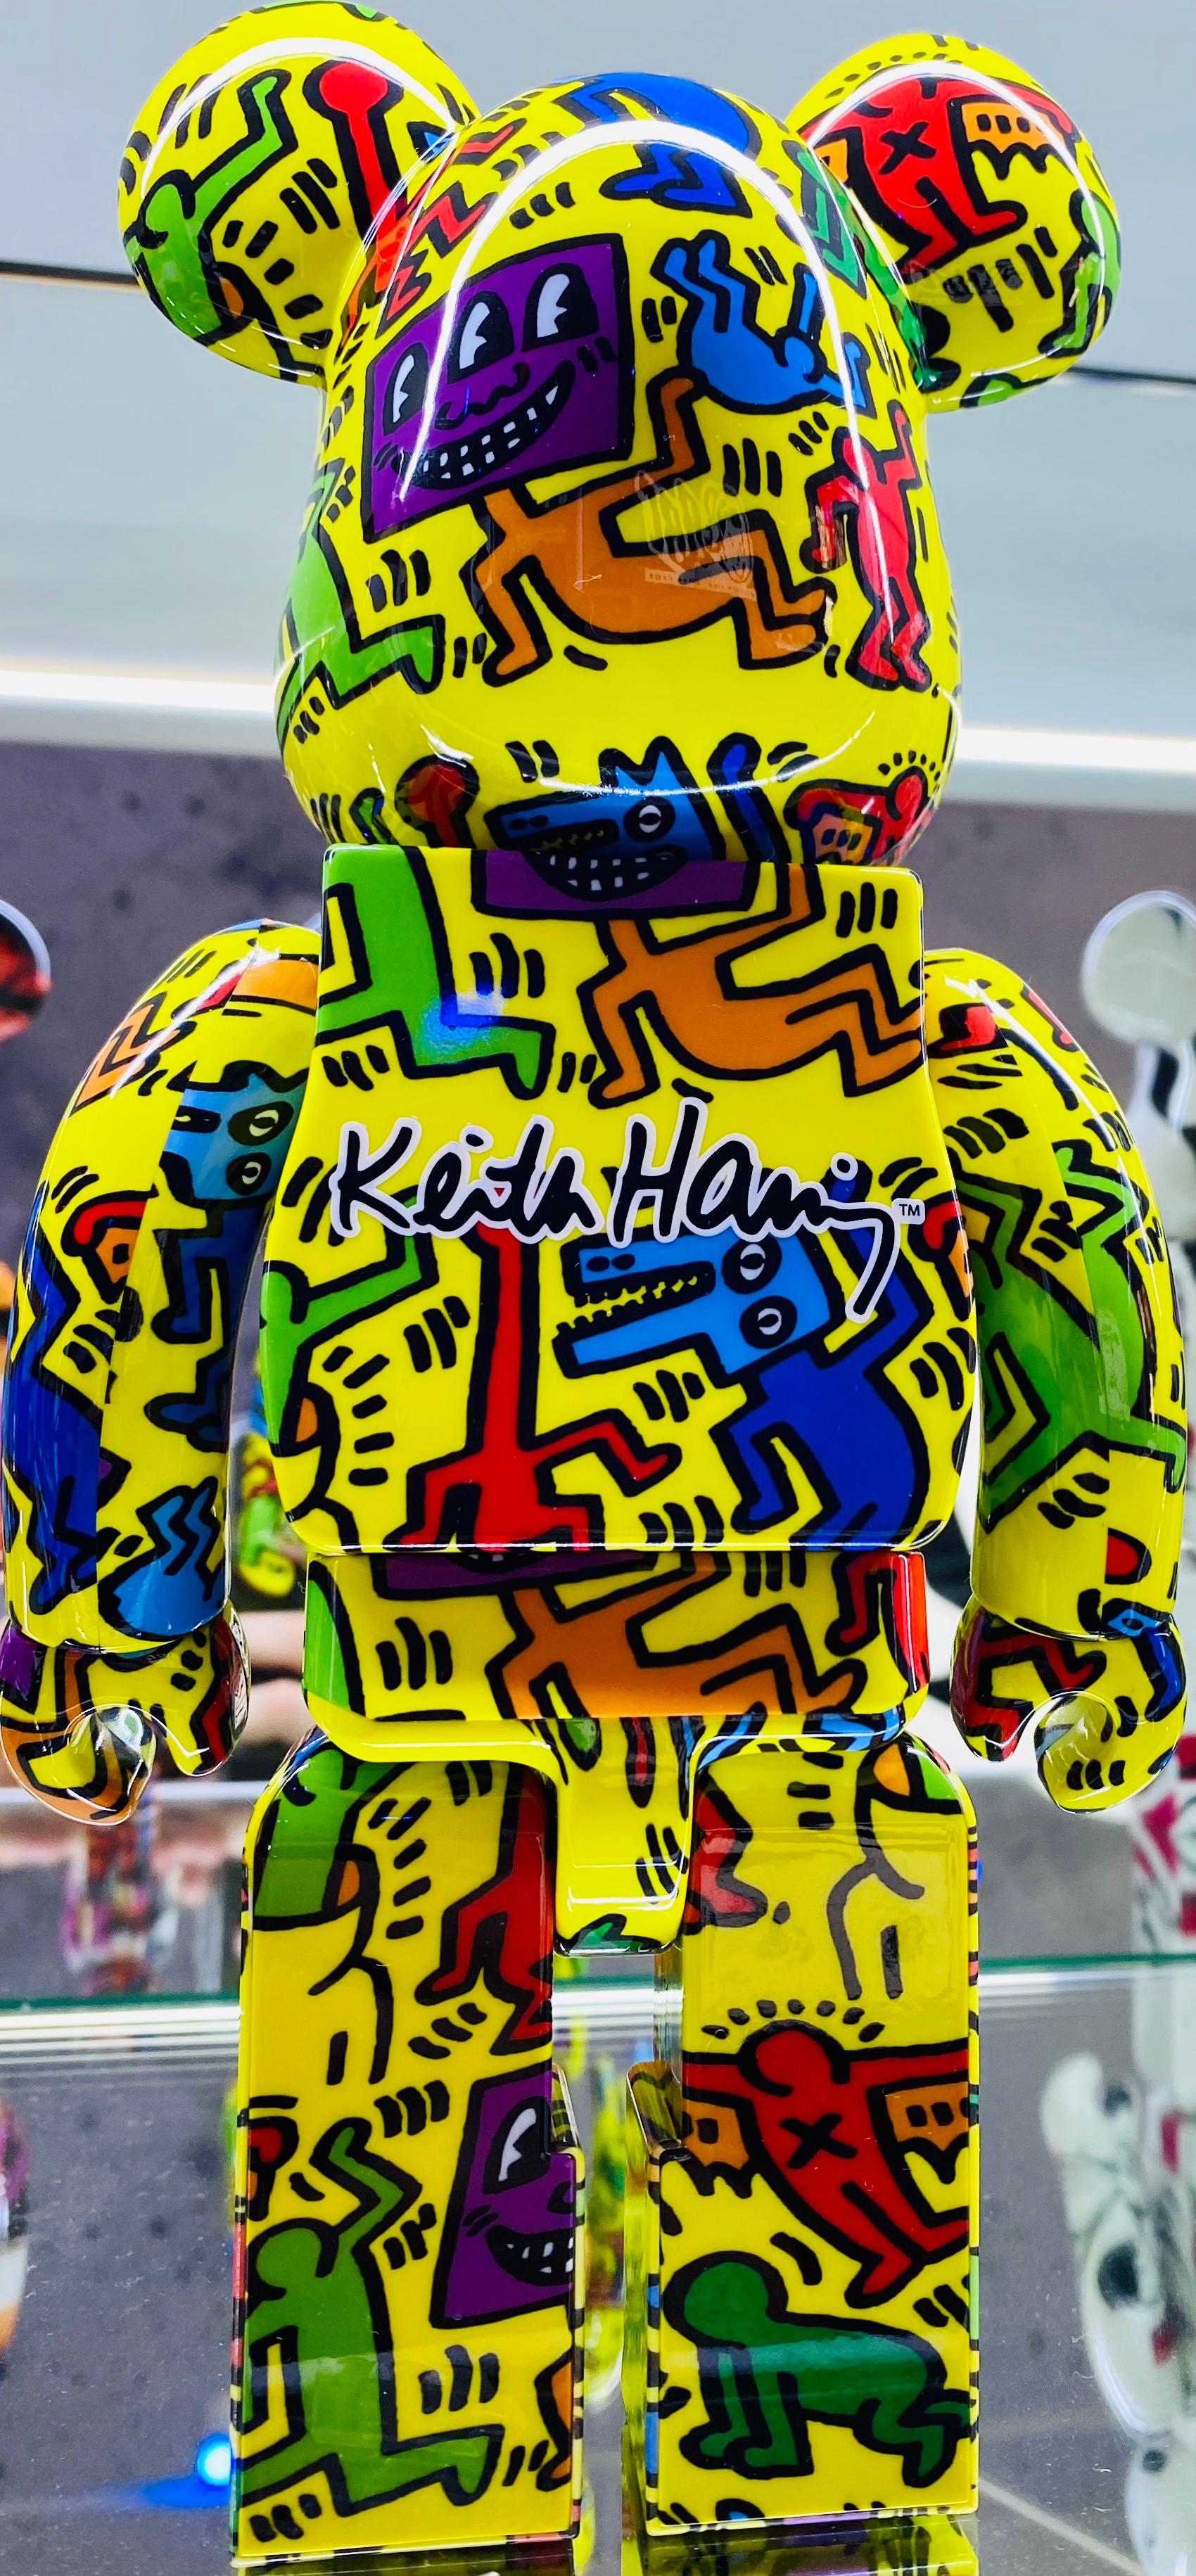 Keith Haring Bearbrick 400 % Companion (Haring BE@RBRICK) - Art urbain Sculpture par (after) Keith Haring